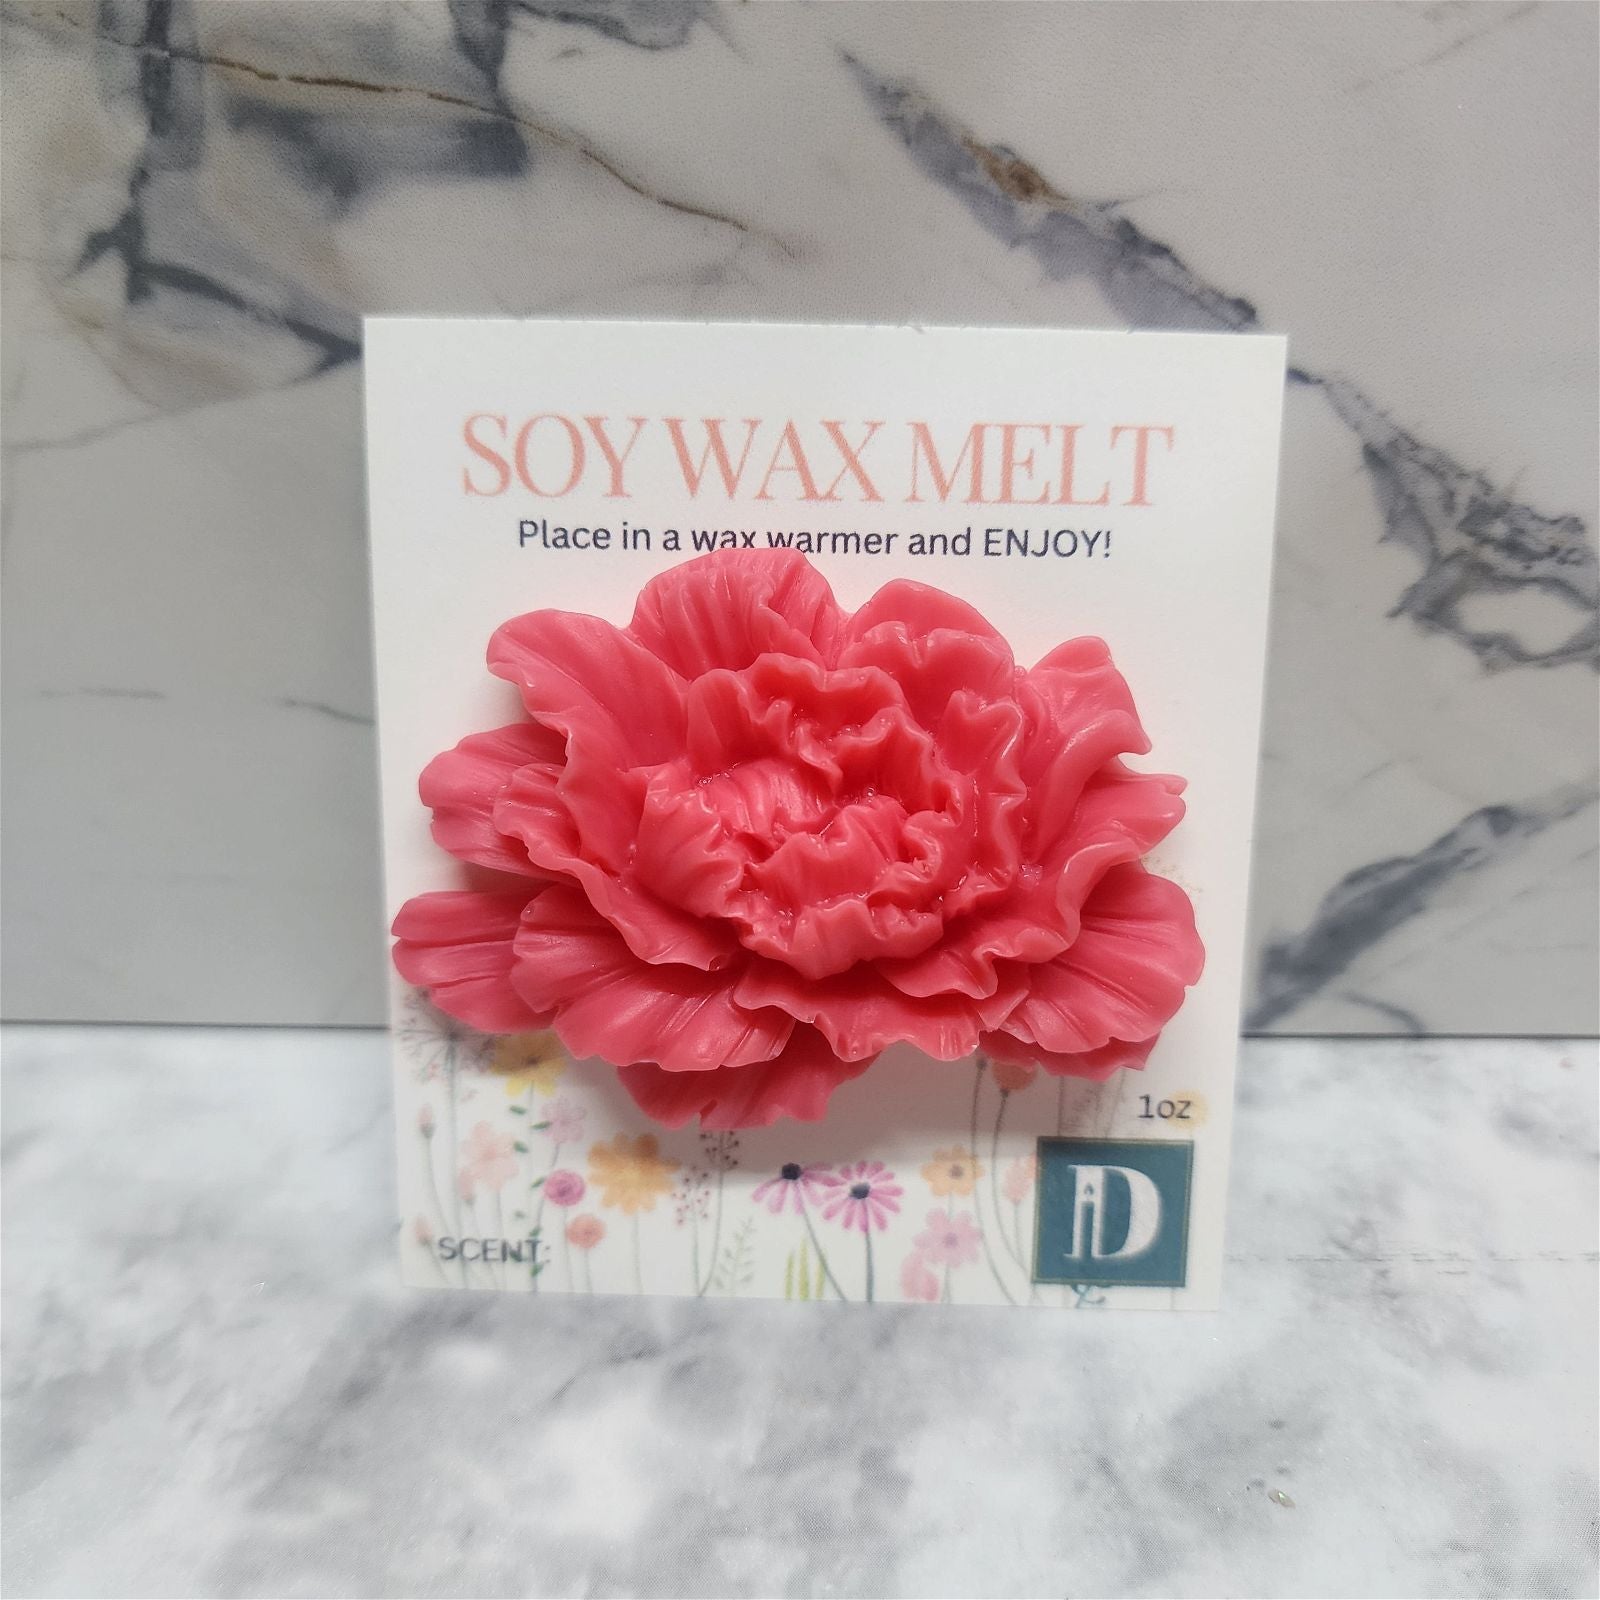 Peoni Rose Flower Melt | Soy Wax - D SCENT 